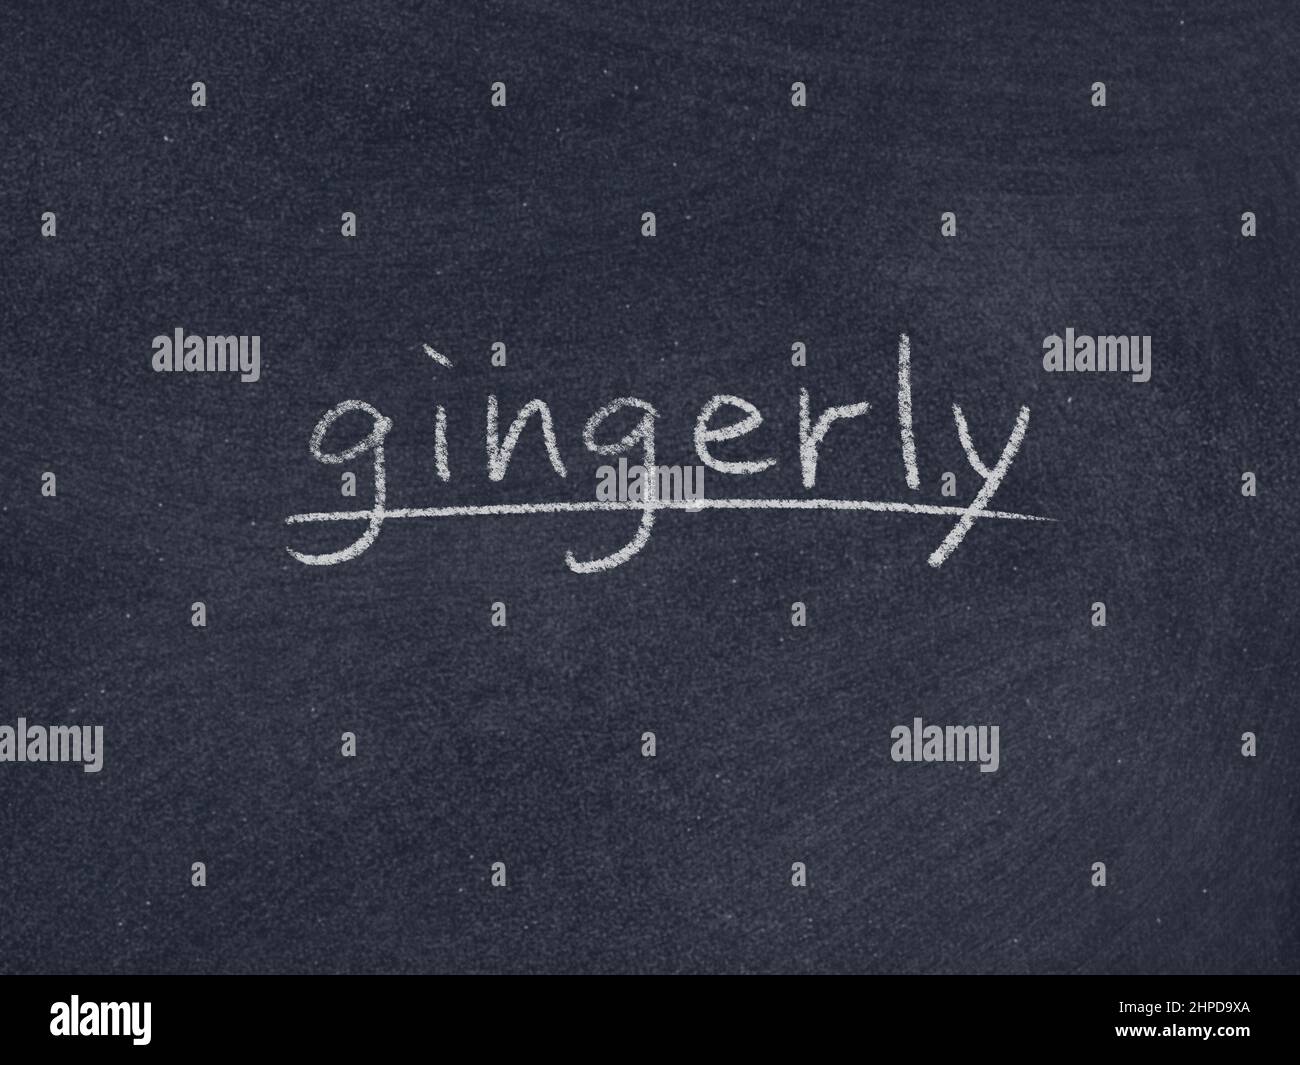 gingerly concept word on blackboard background Stock Photo